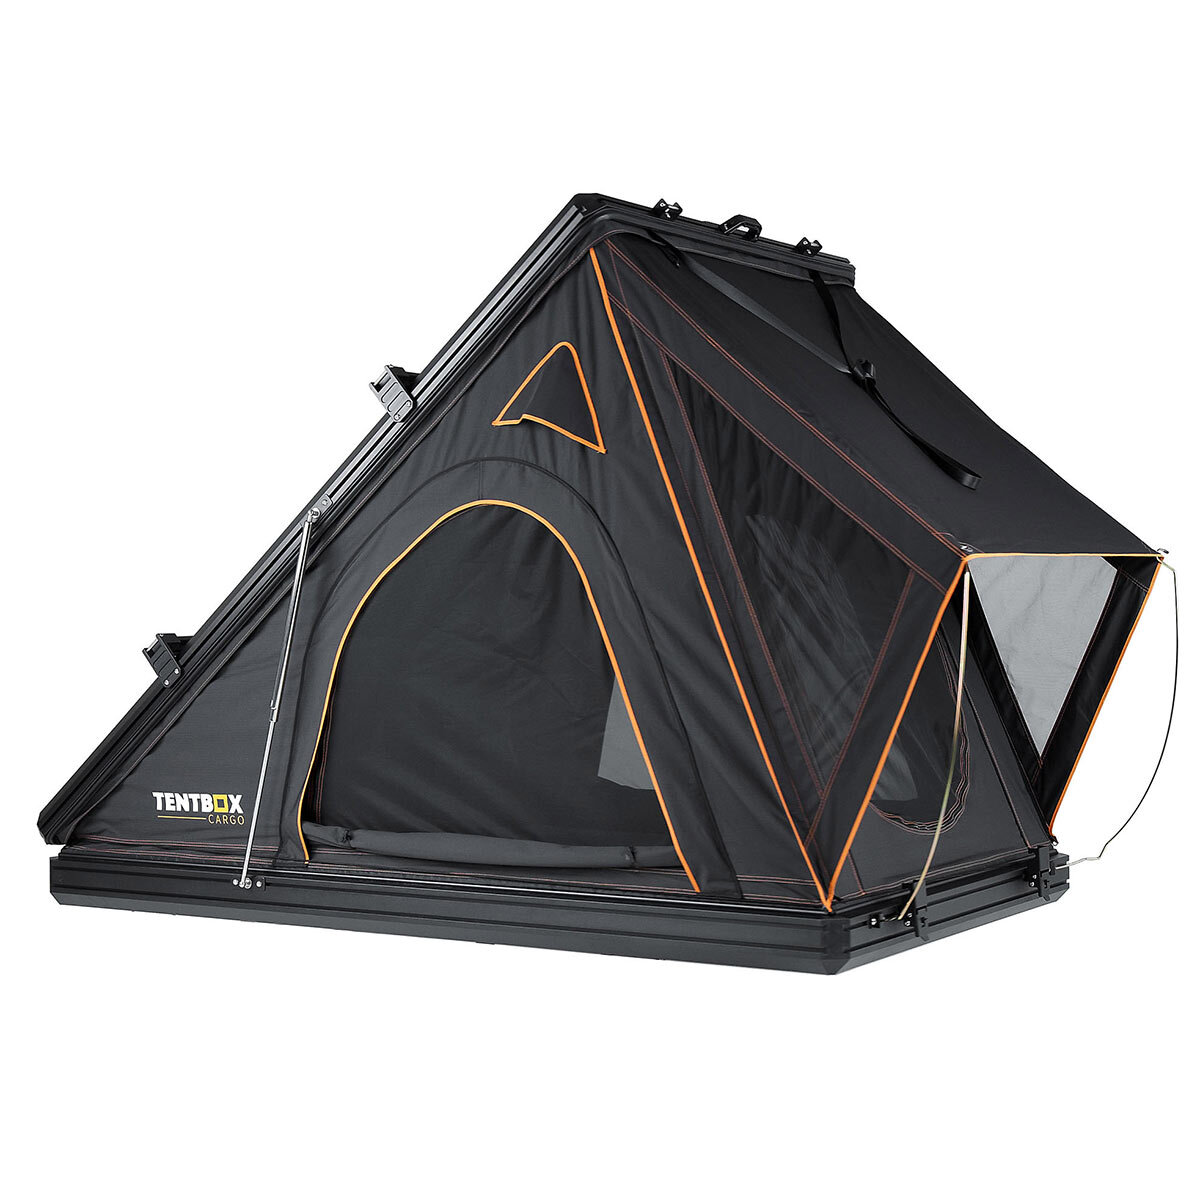 Tent Box Cargo cut out image